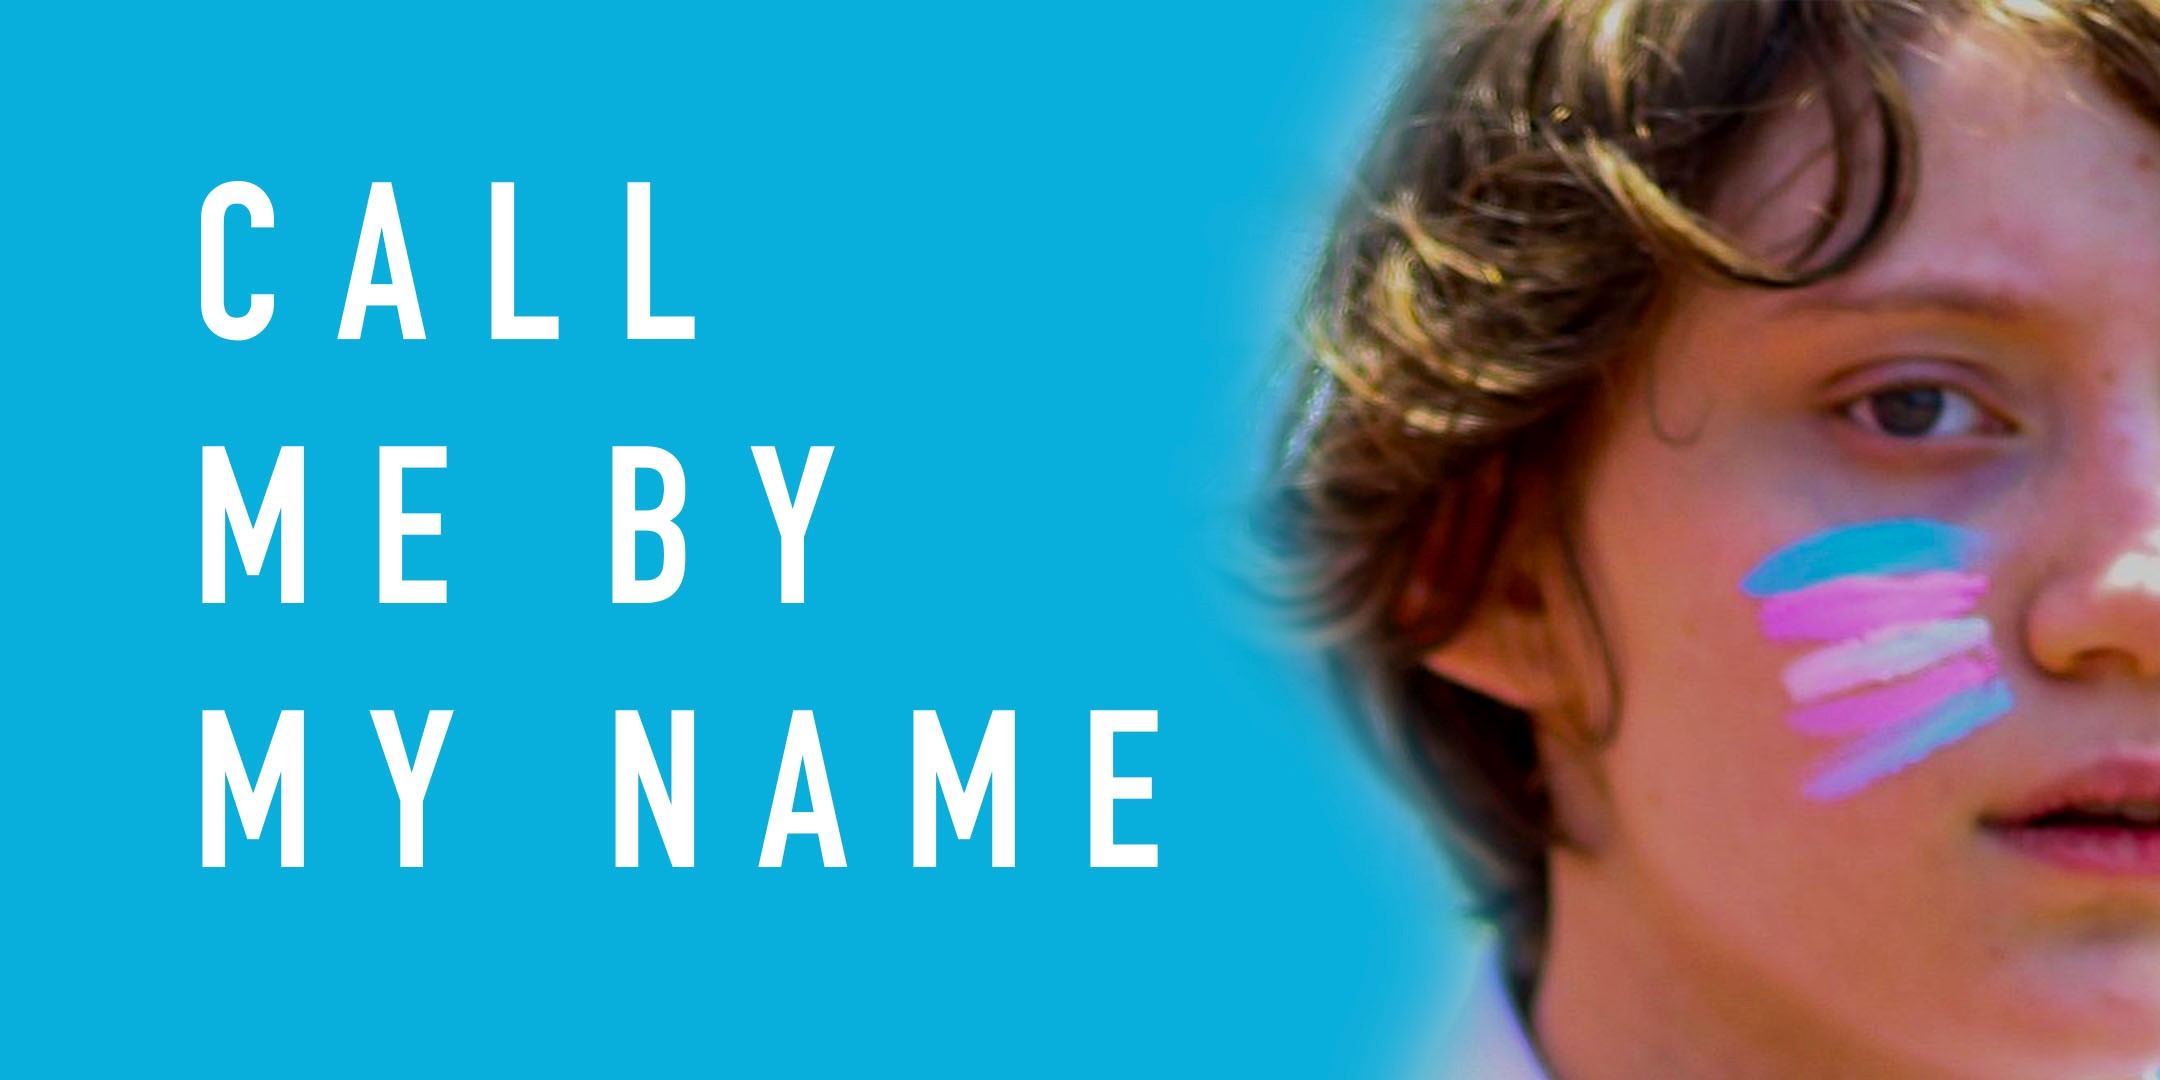 Call Me By My Name designed